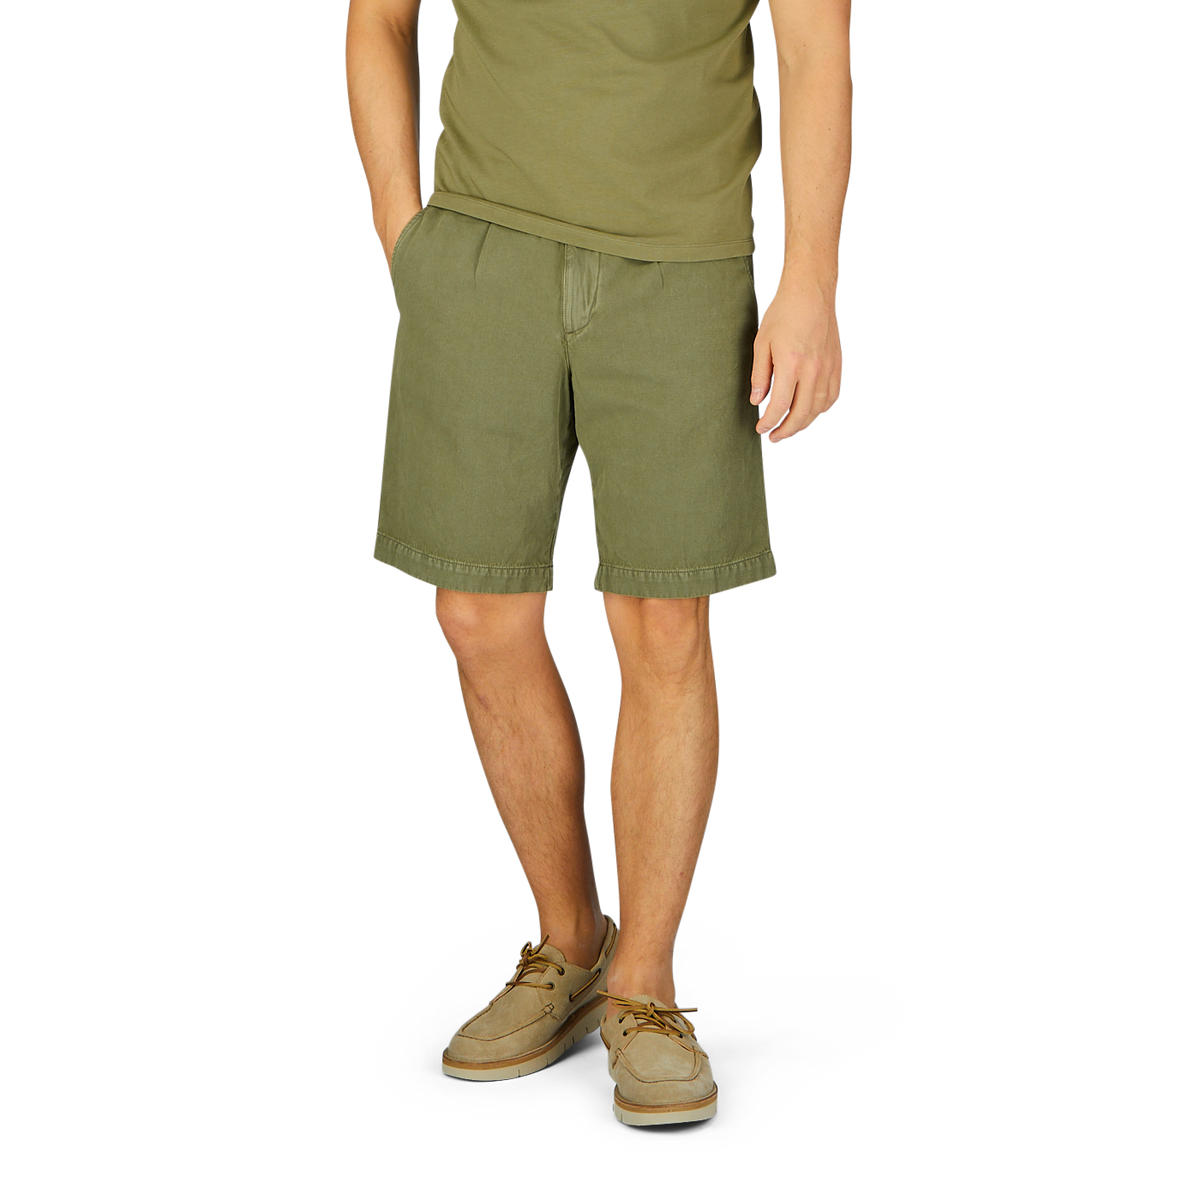 Man wearing Briglia's grass green cotton linen pleated shorts with an adjustable waistband and tan shoes standing against a neutral background.